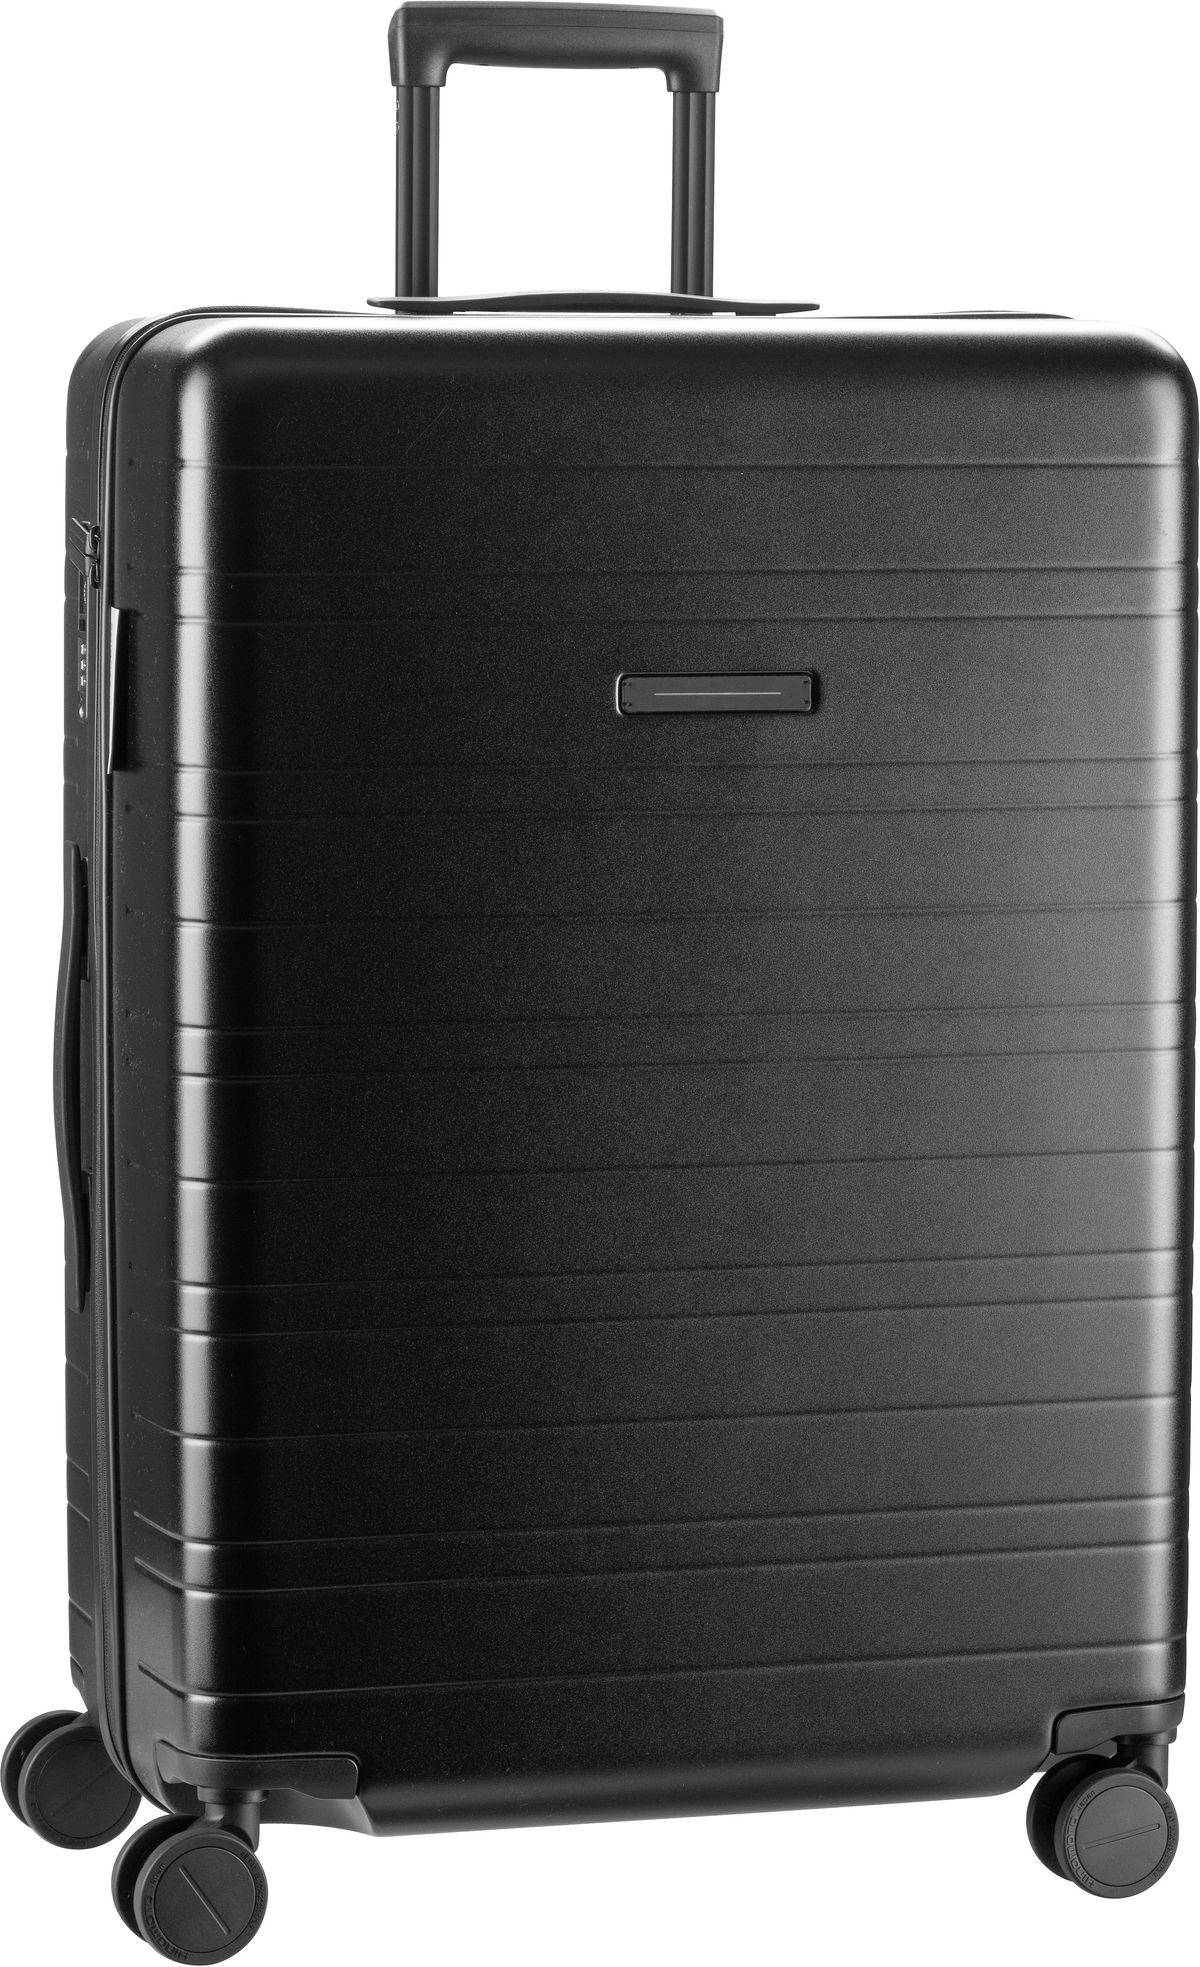 Horizn Studios H7 Essential Check-In Luggage - All Black